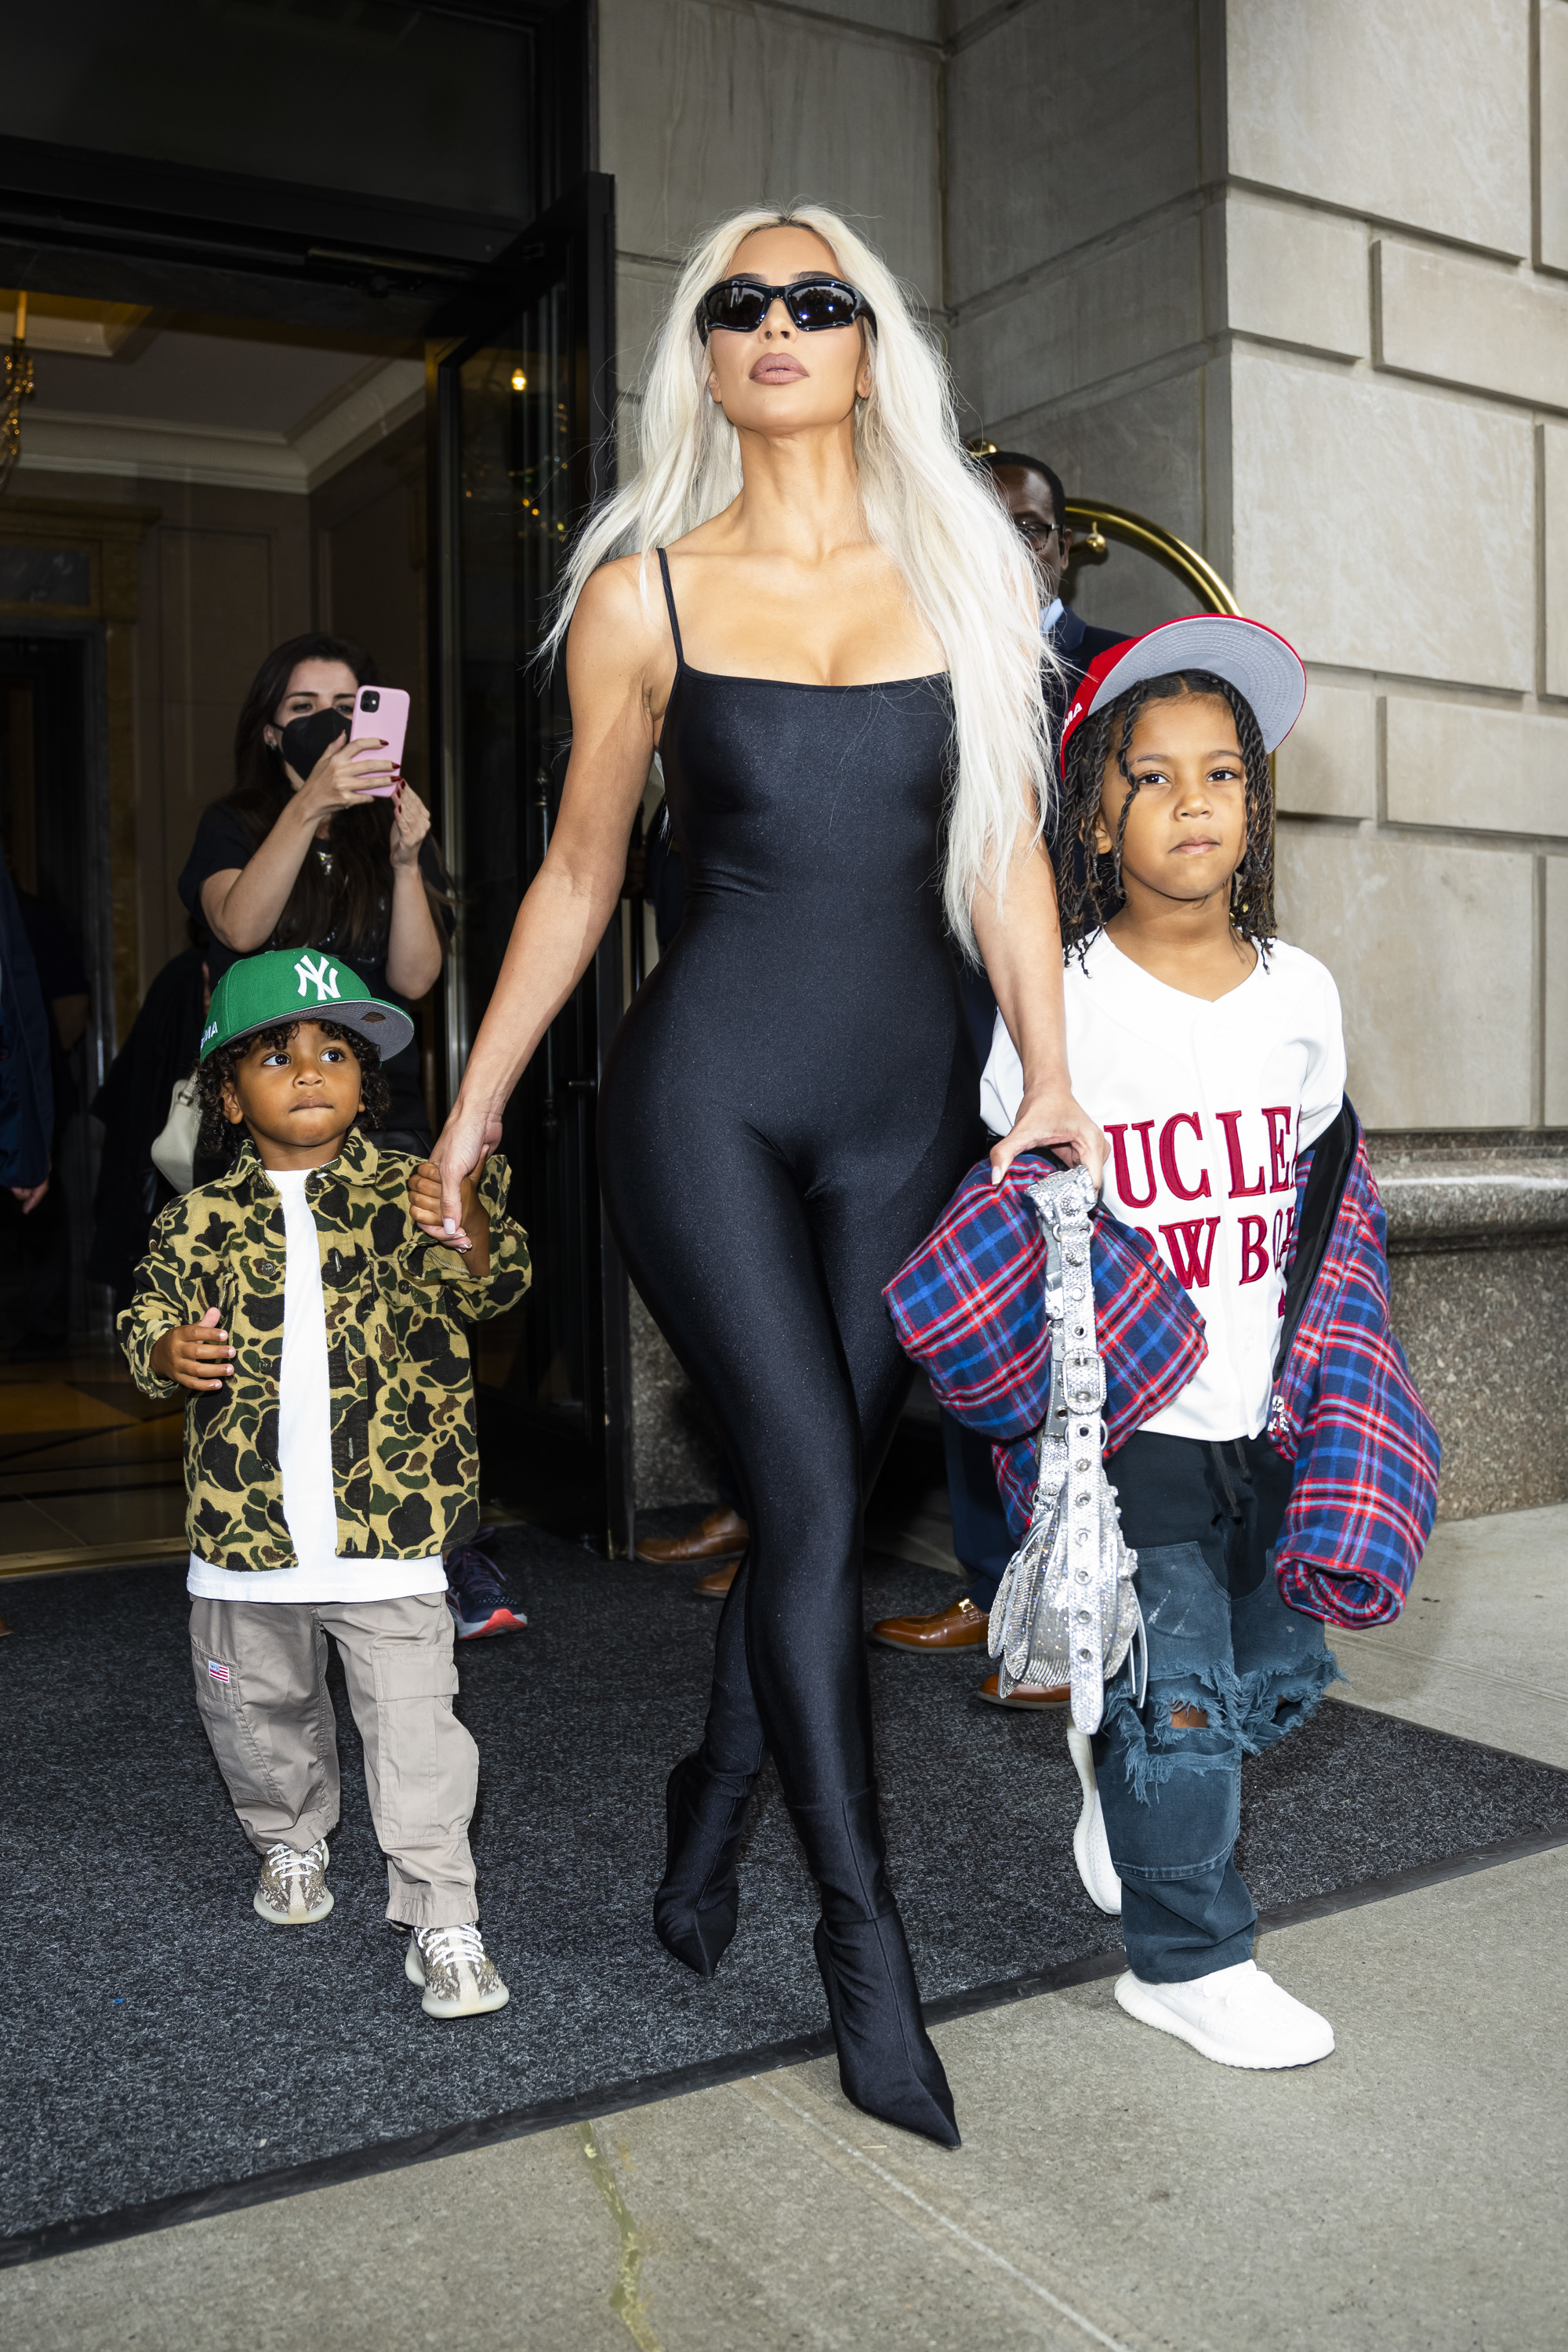 Kim exiting a building with her kids